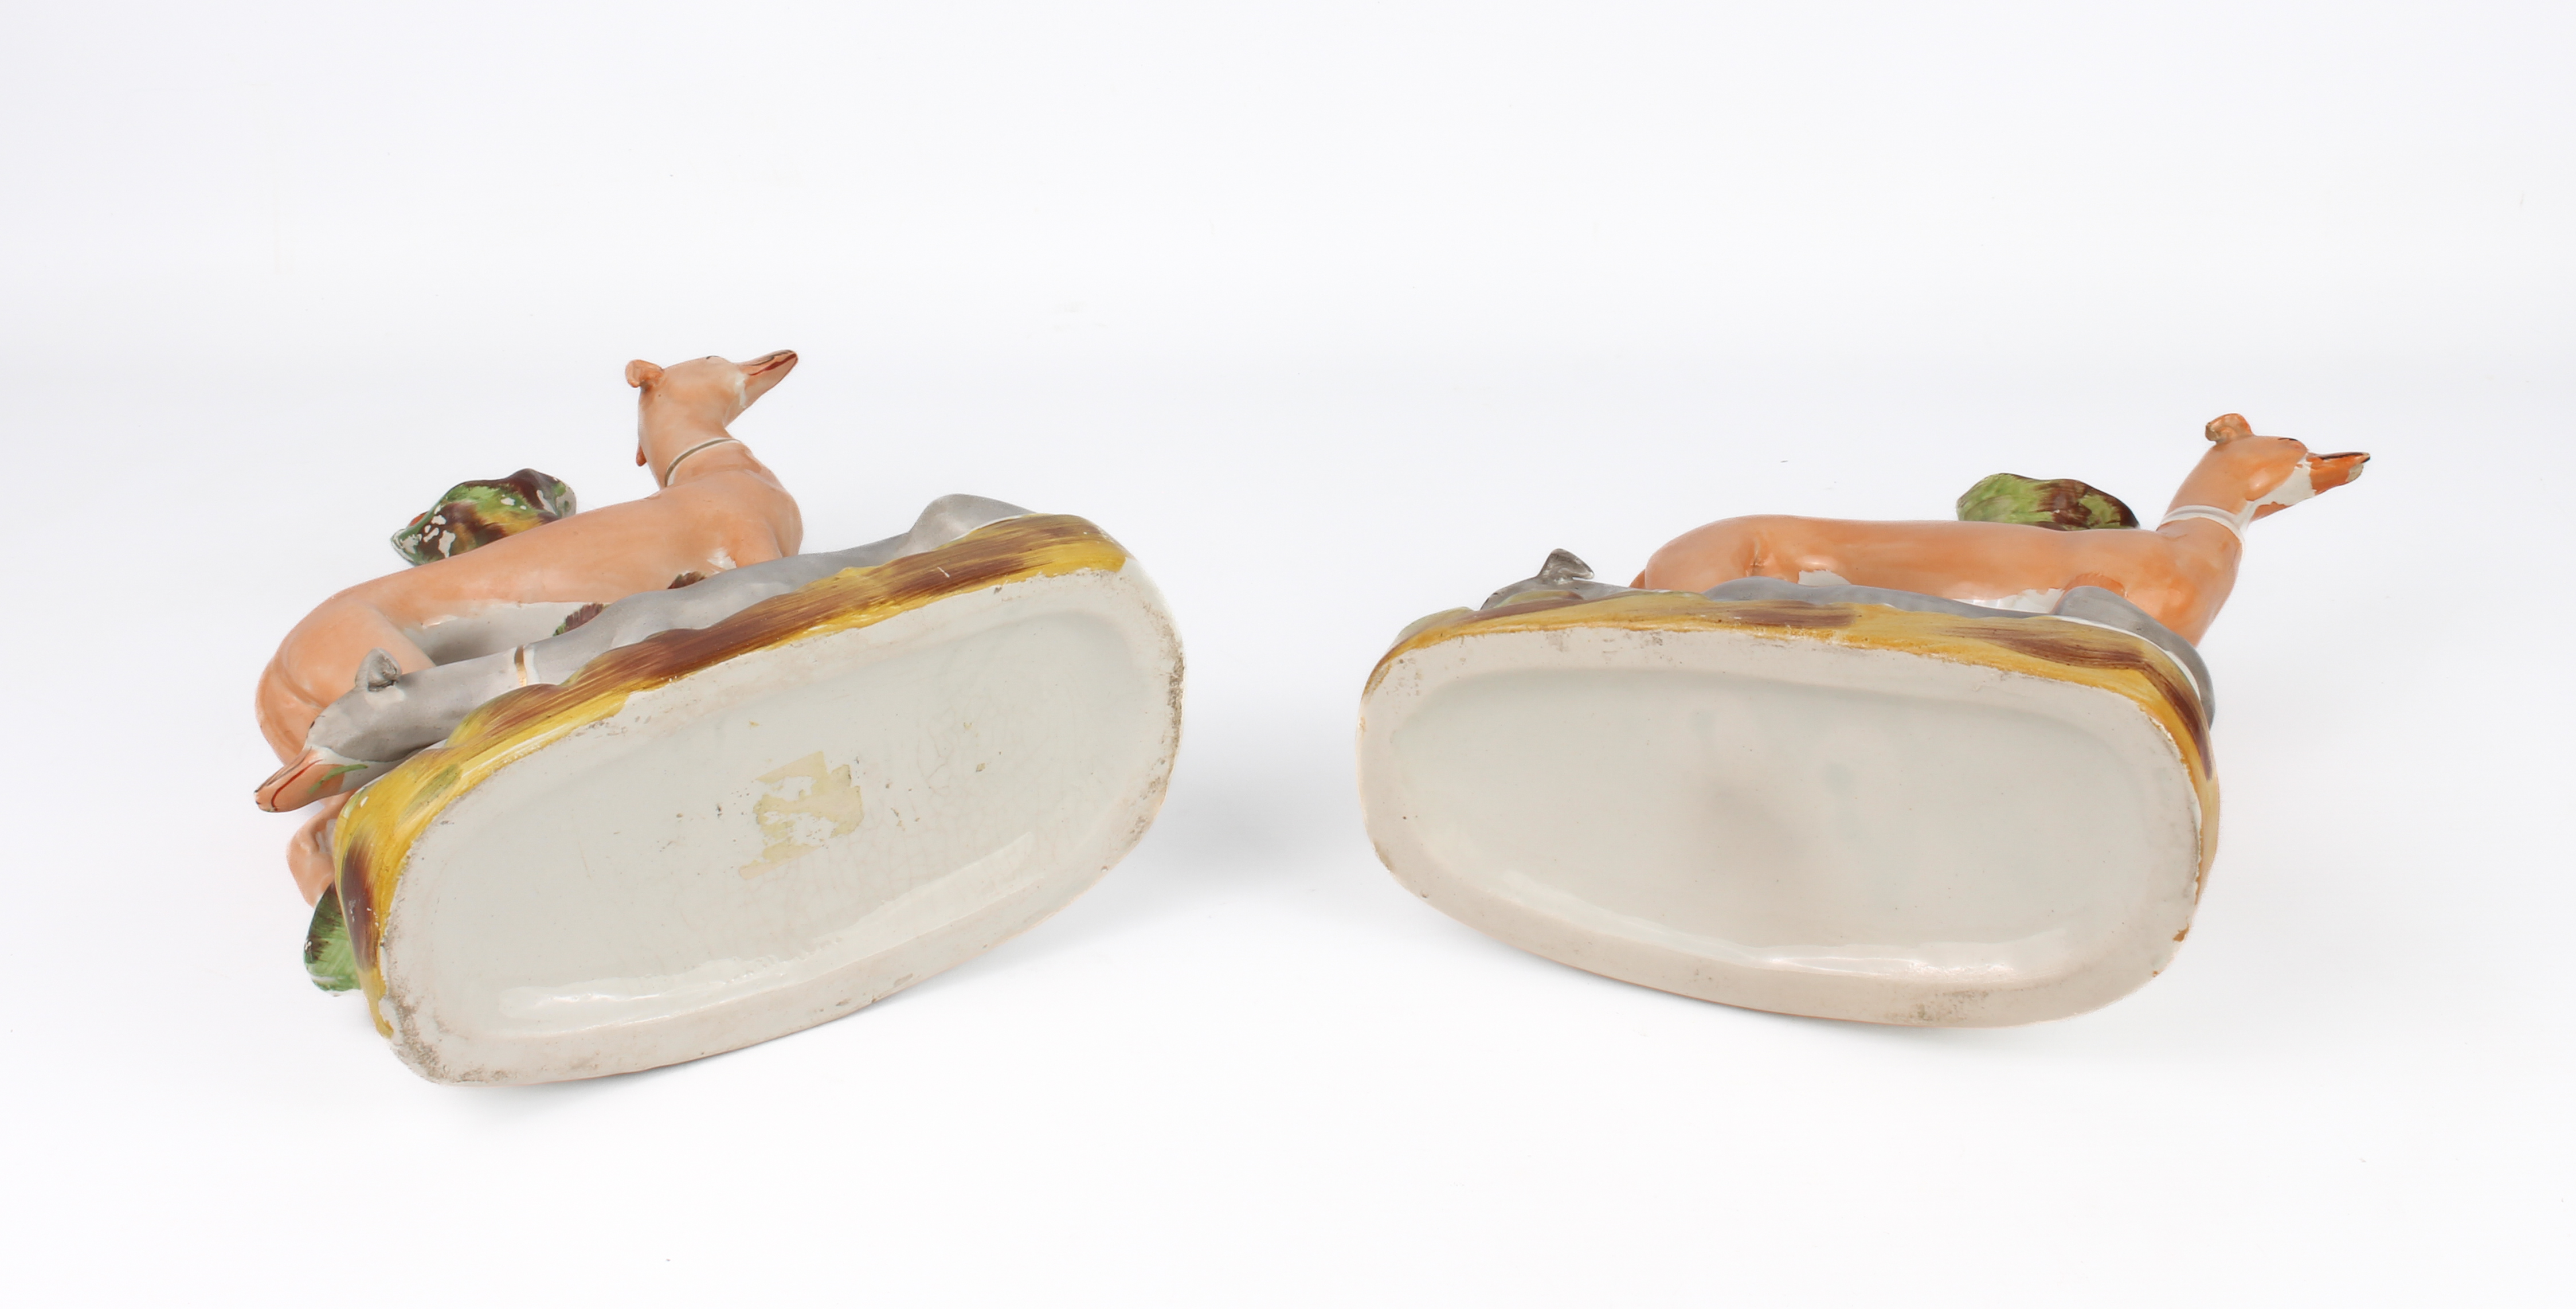 A closely matched pair of Staffordshire pottery greyhound spill vases - 19th century, both right - Image 3 of 3